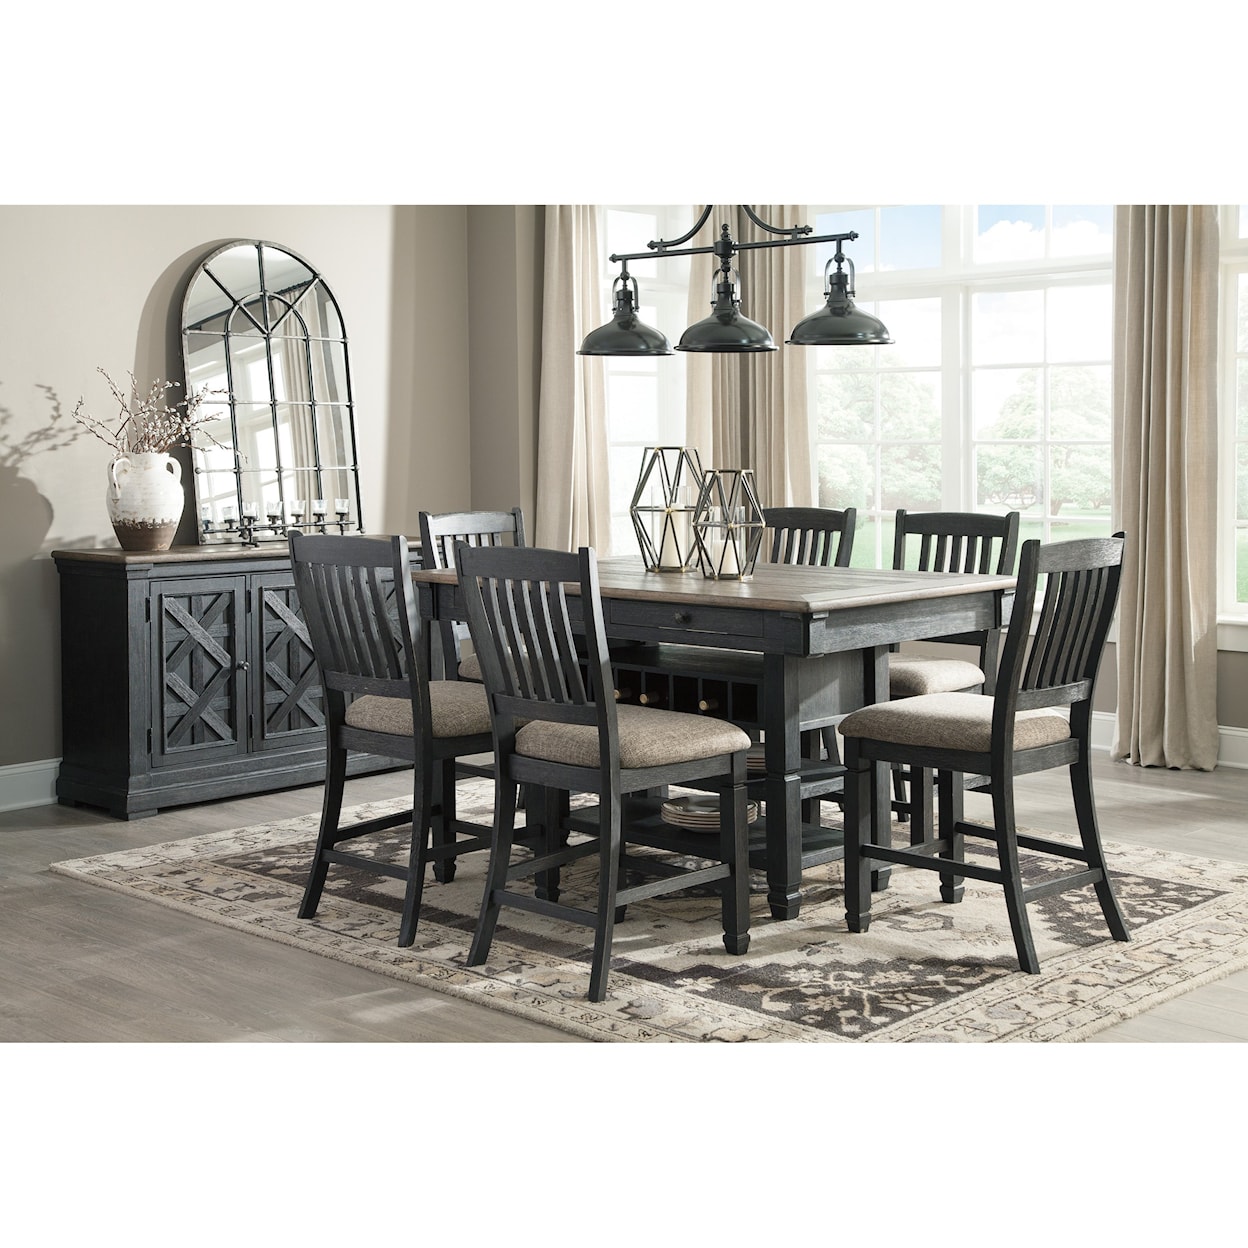 Signature Design by Ashley Tory Formal Dining Room Group